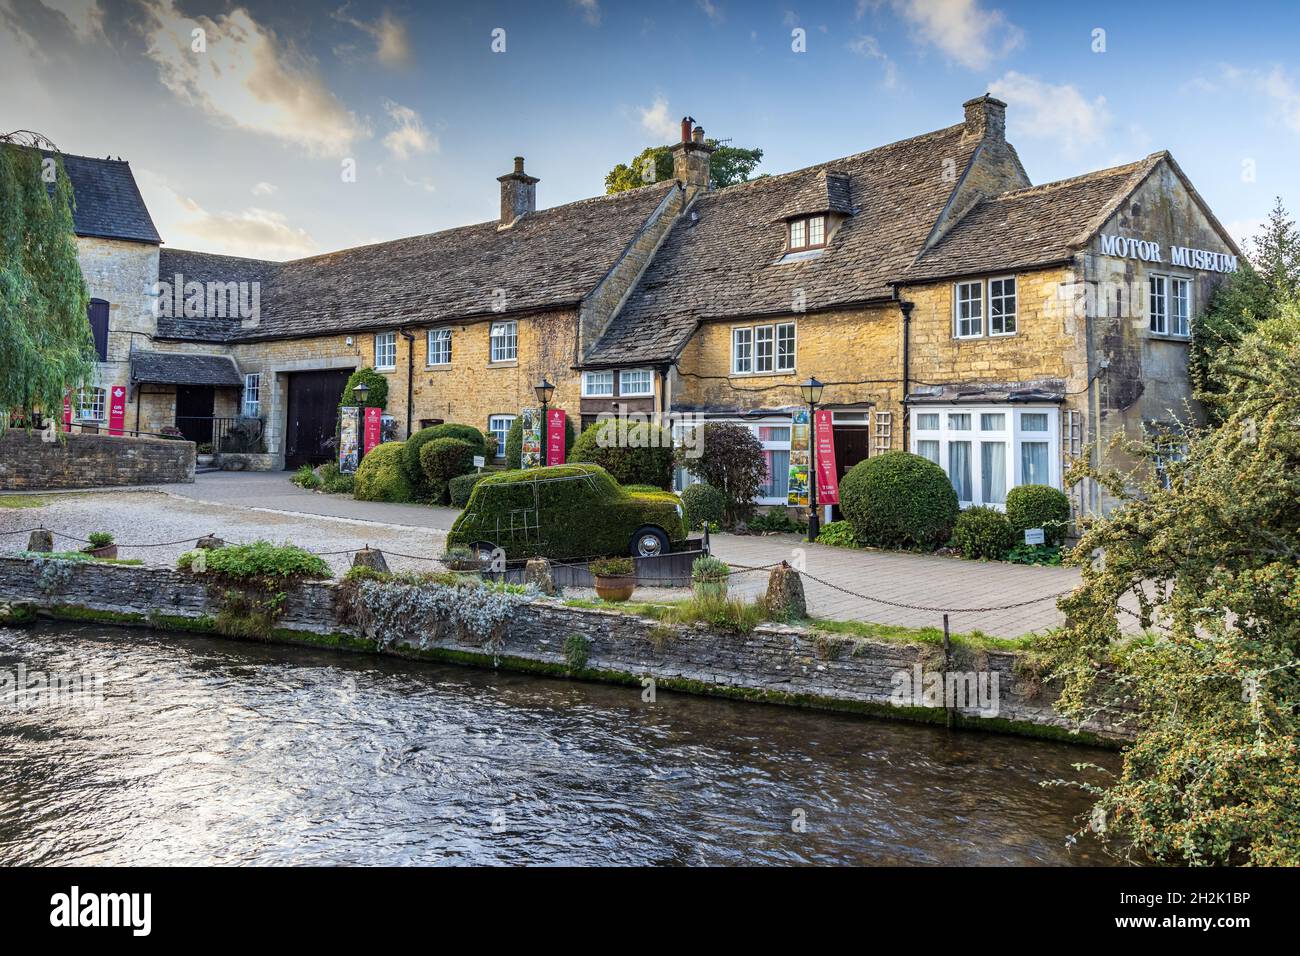 The Cotswold Motoring Museum by the River Windrush at Bourton-on-the-Water in the Cotswolds, Gloucestershire, England. Stock Photo